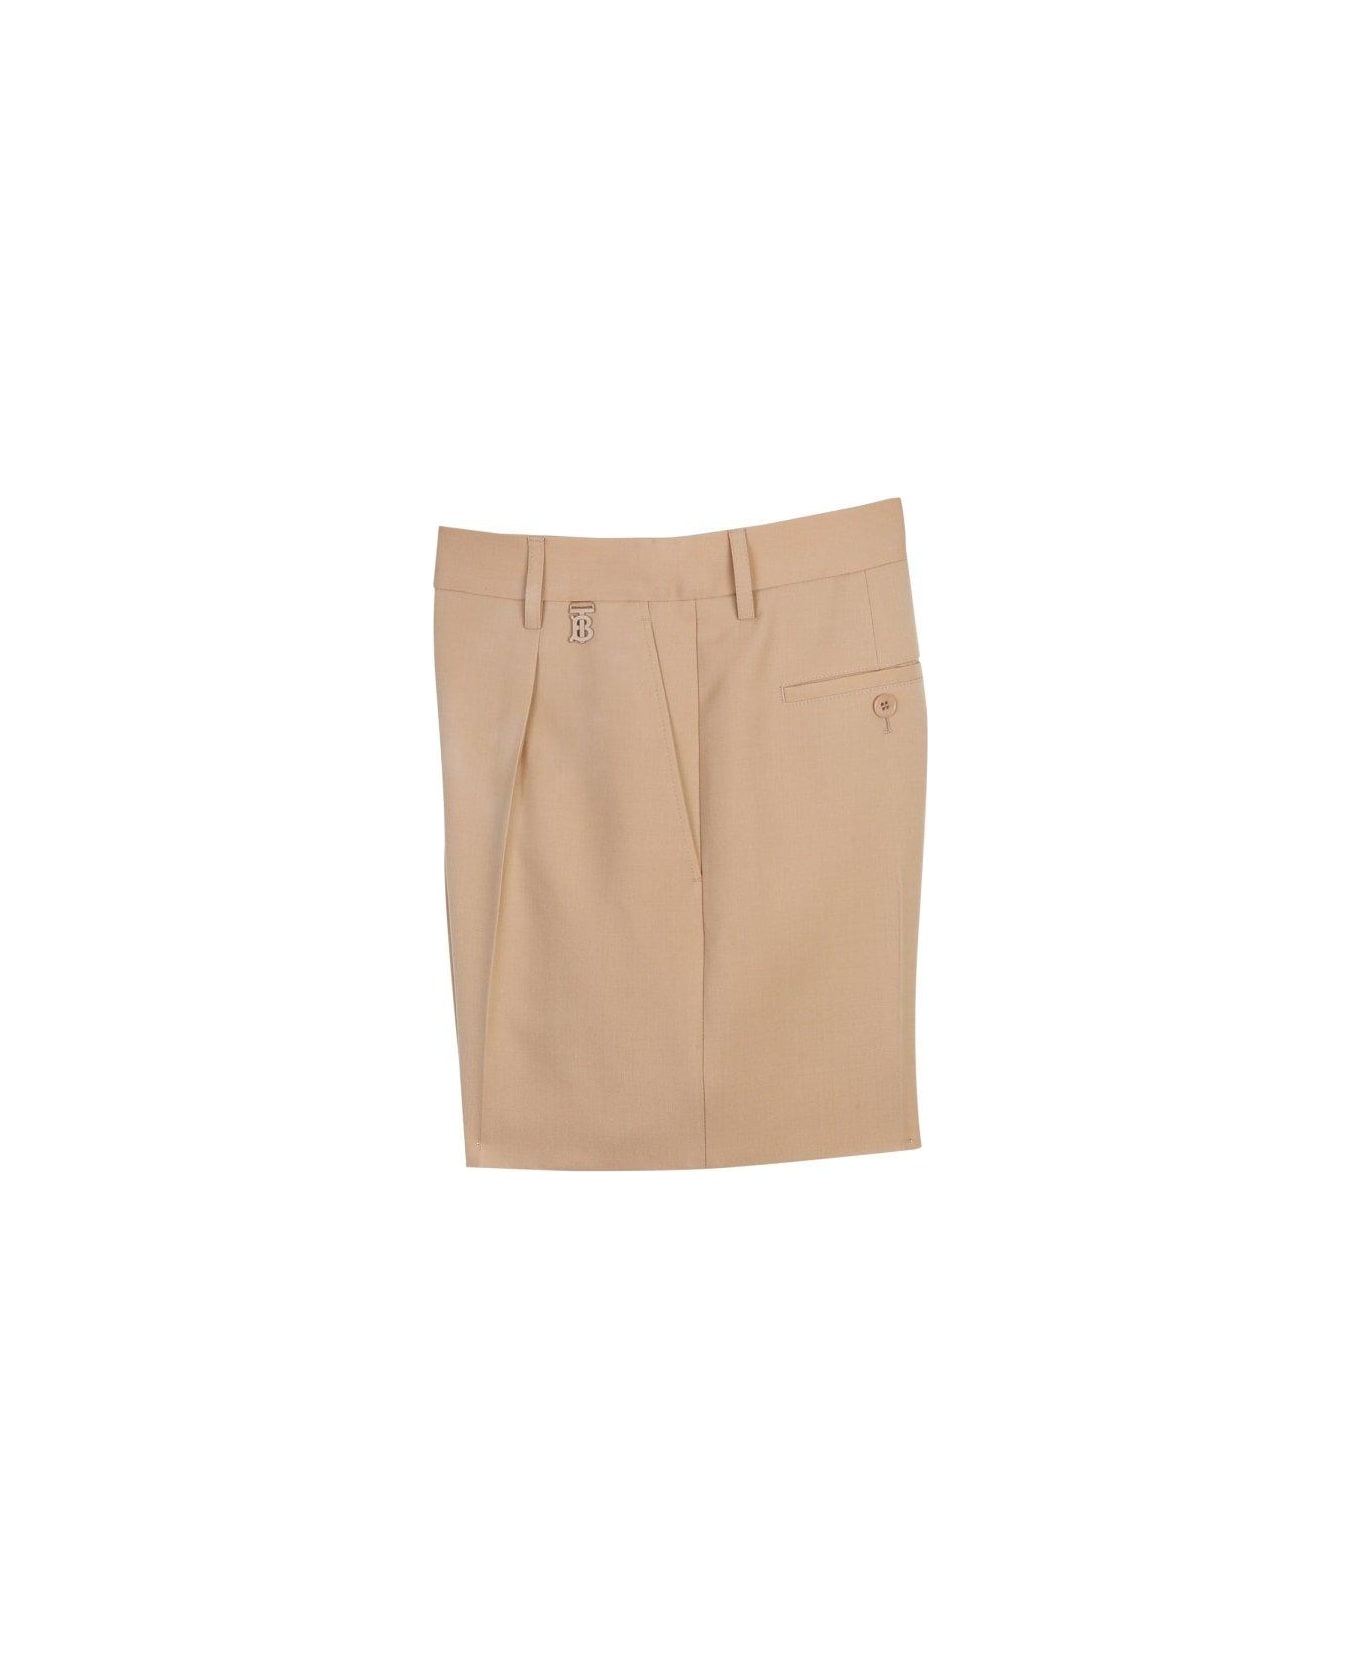 Burberry Logo Detailed Pleated Shorts - BROWN ショートパンツ